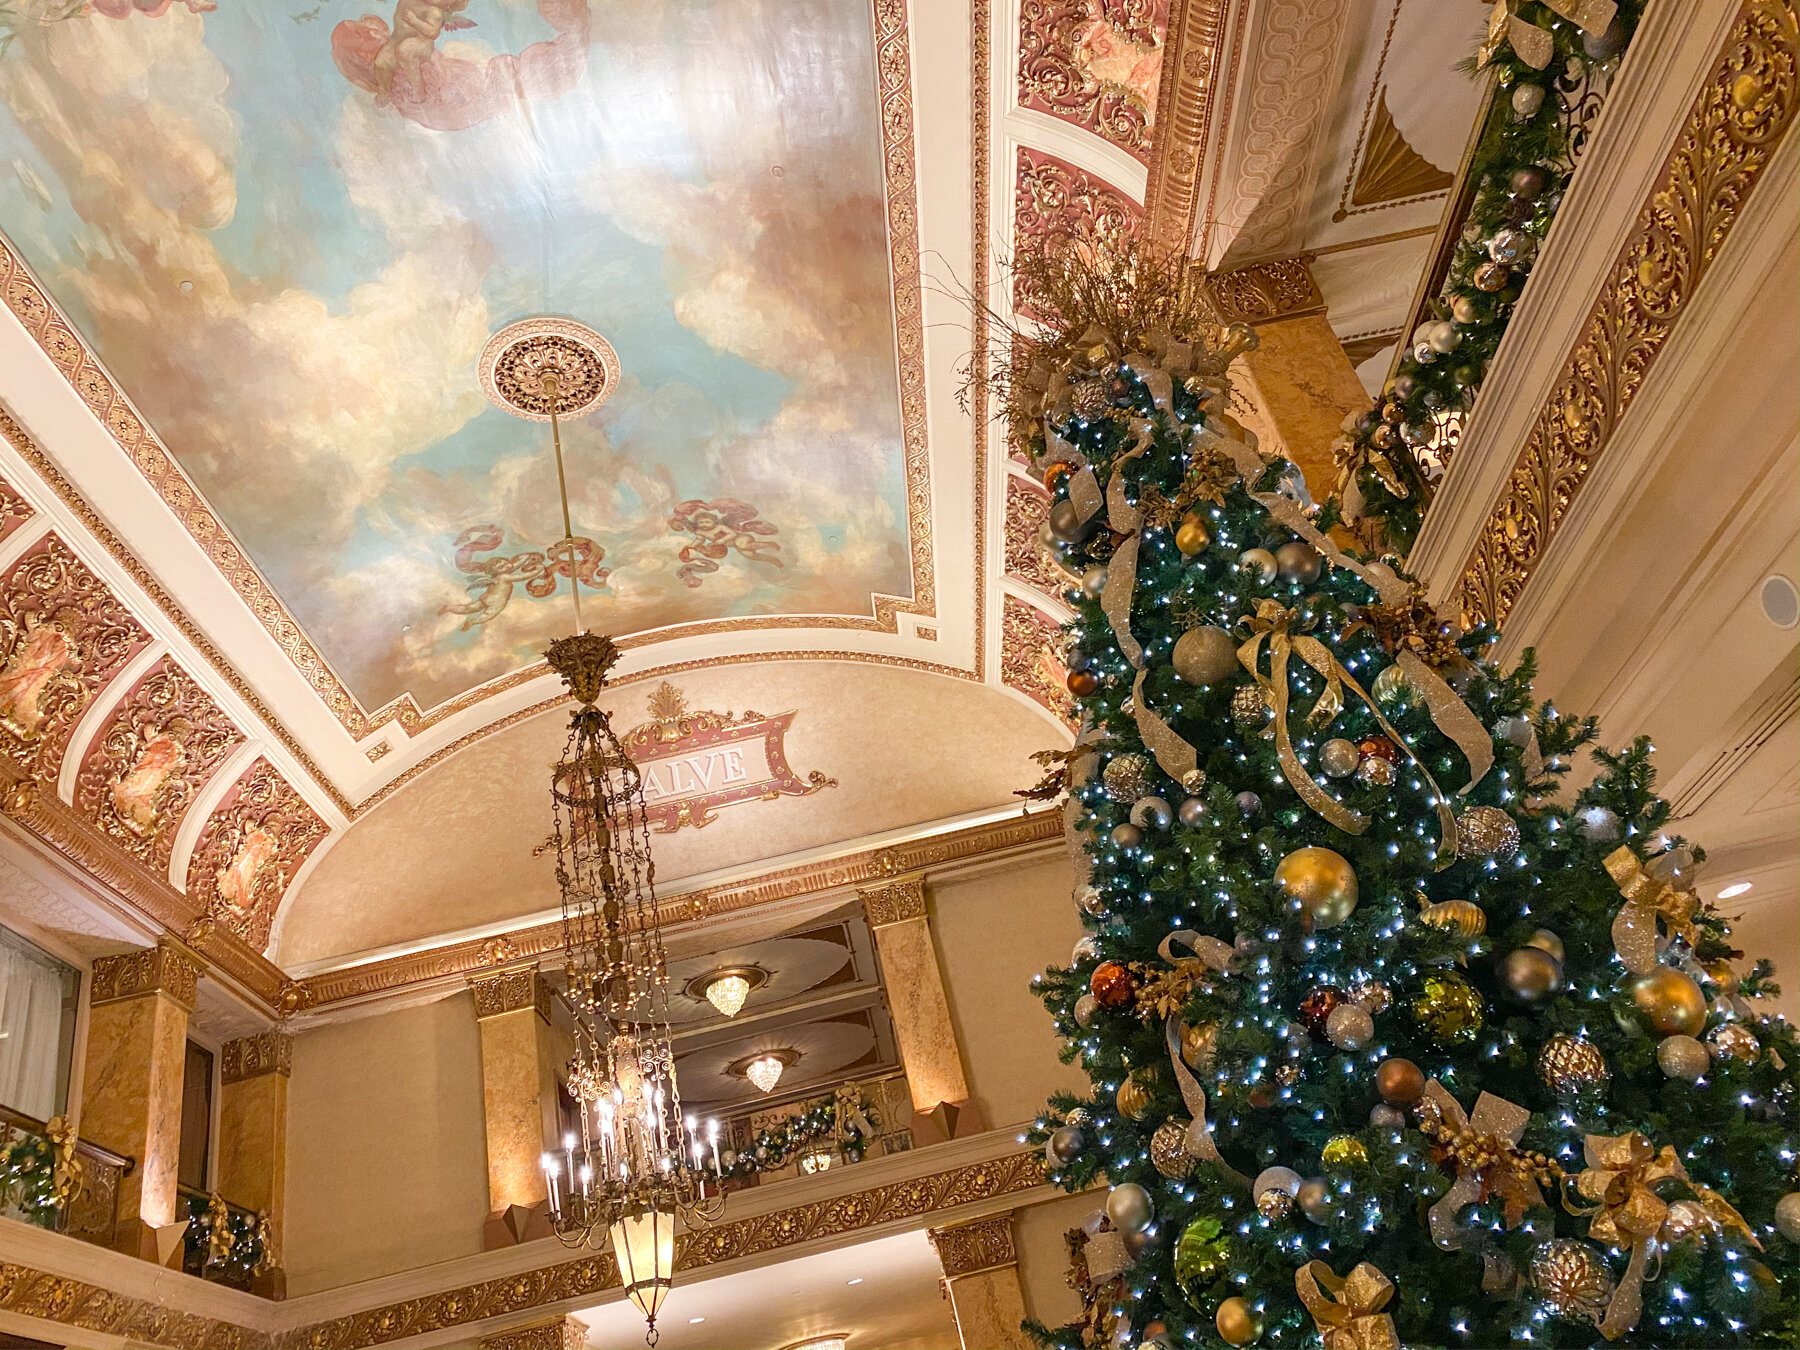 Christmas tree in Lobby at the Pfister Hotel